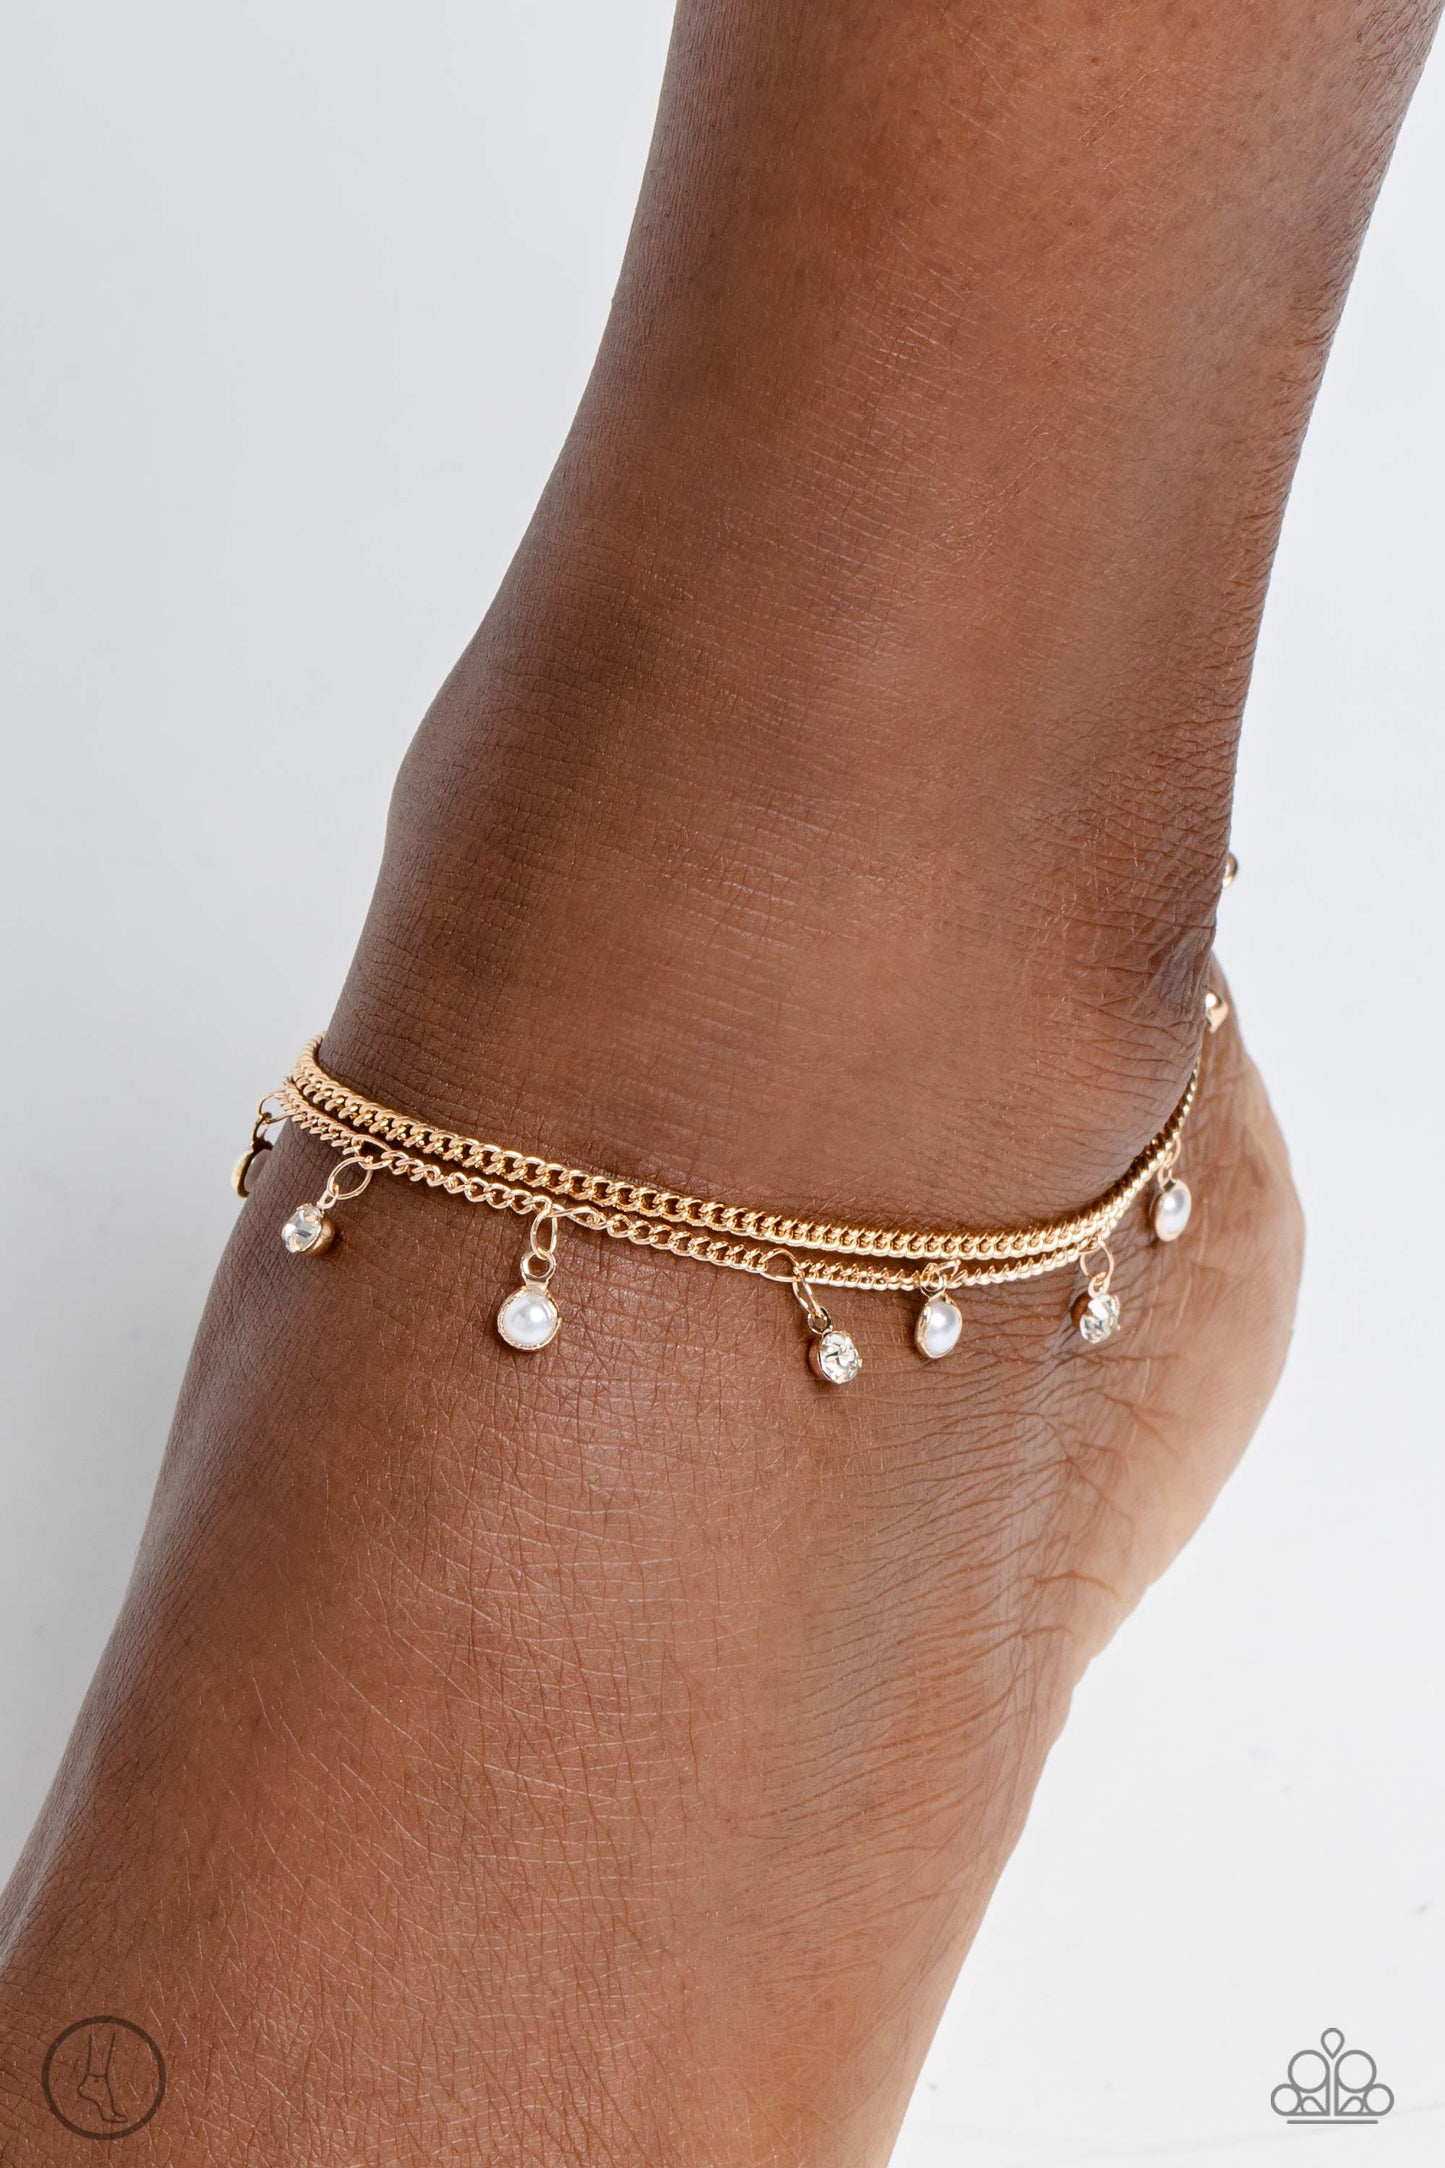 WATER You Waiting For? - Gold anklet